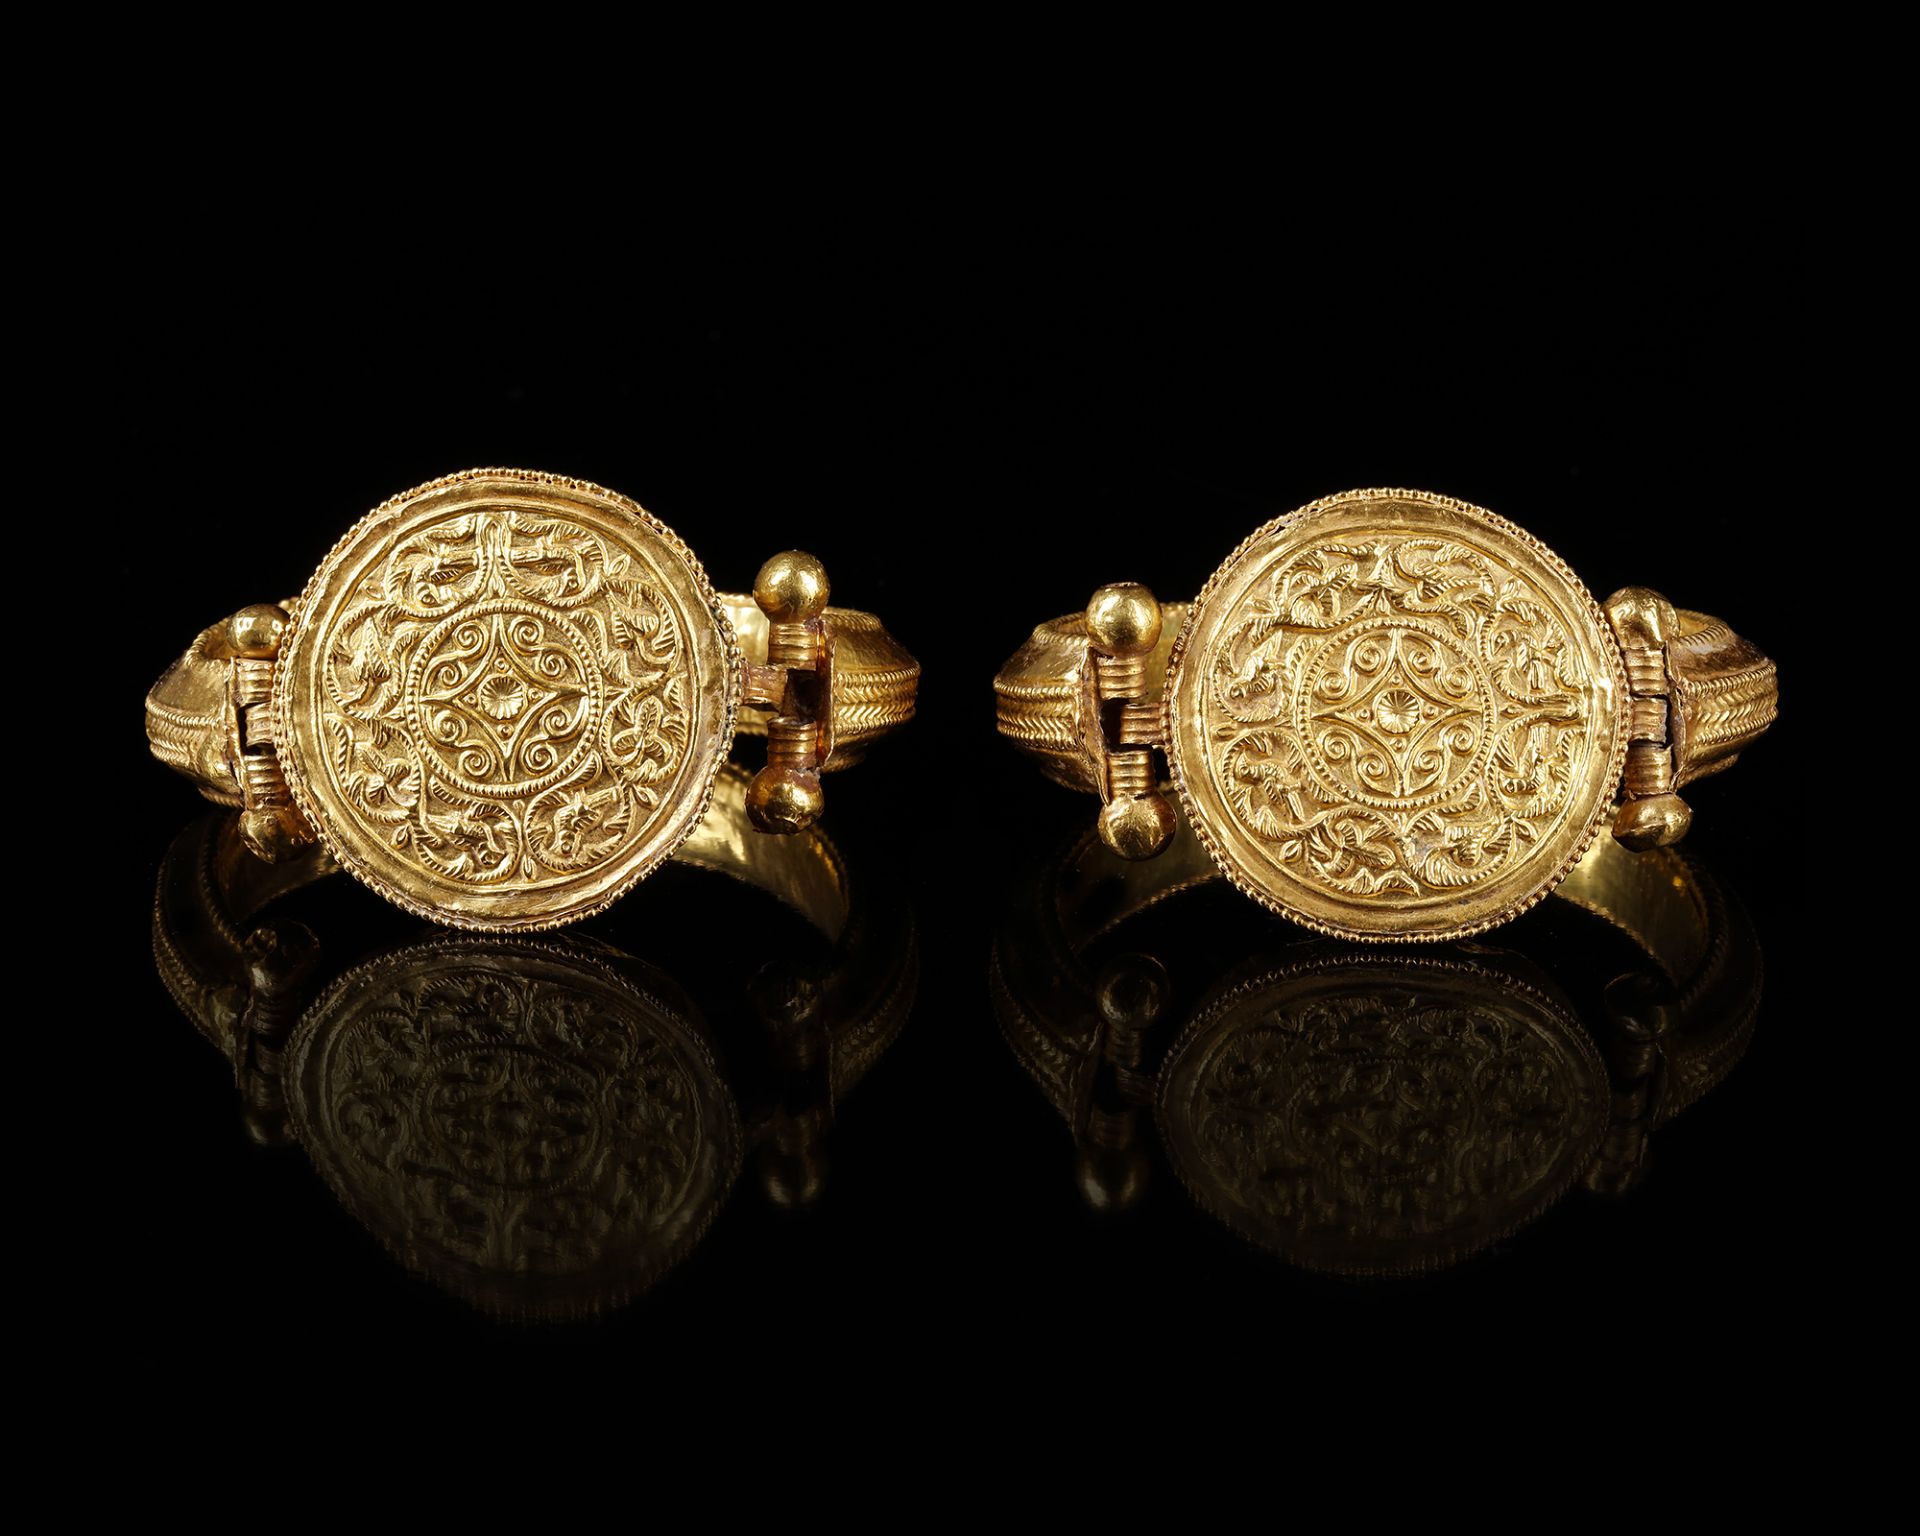 A RARE PAIR OF A FATIMID GOLD BRACELETS, POSSIBLY SYRIA, 11TH CENTURY